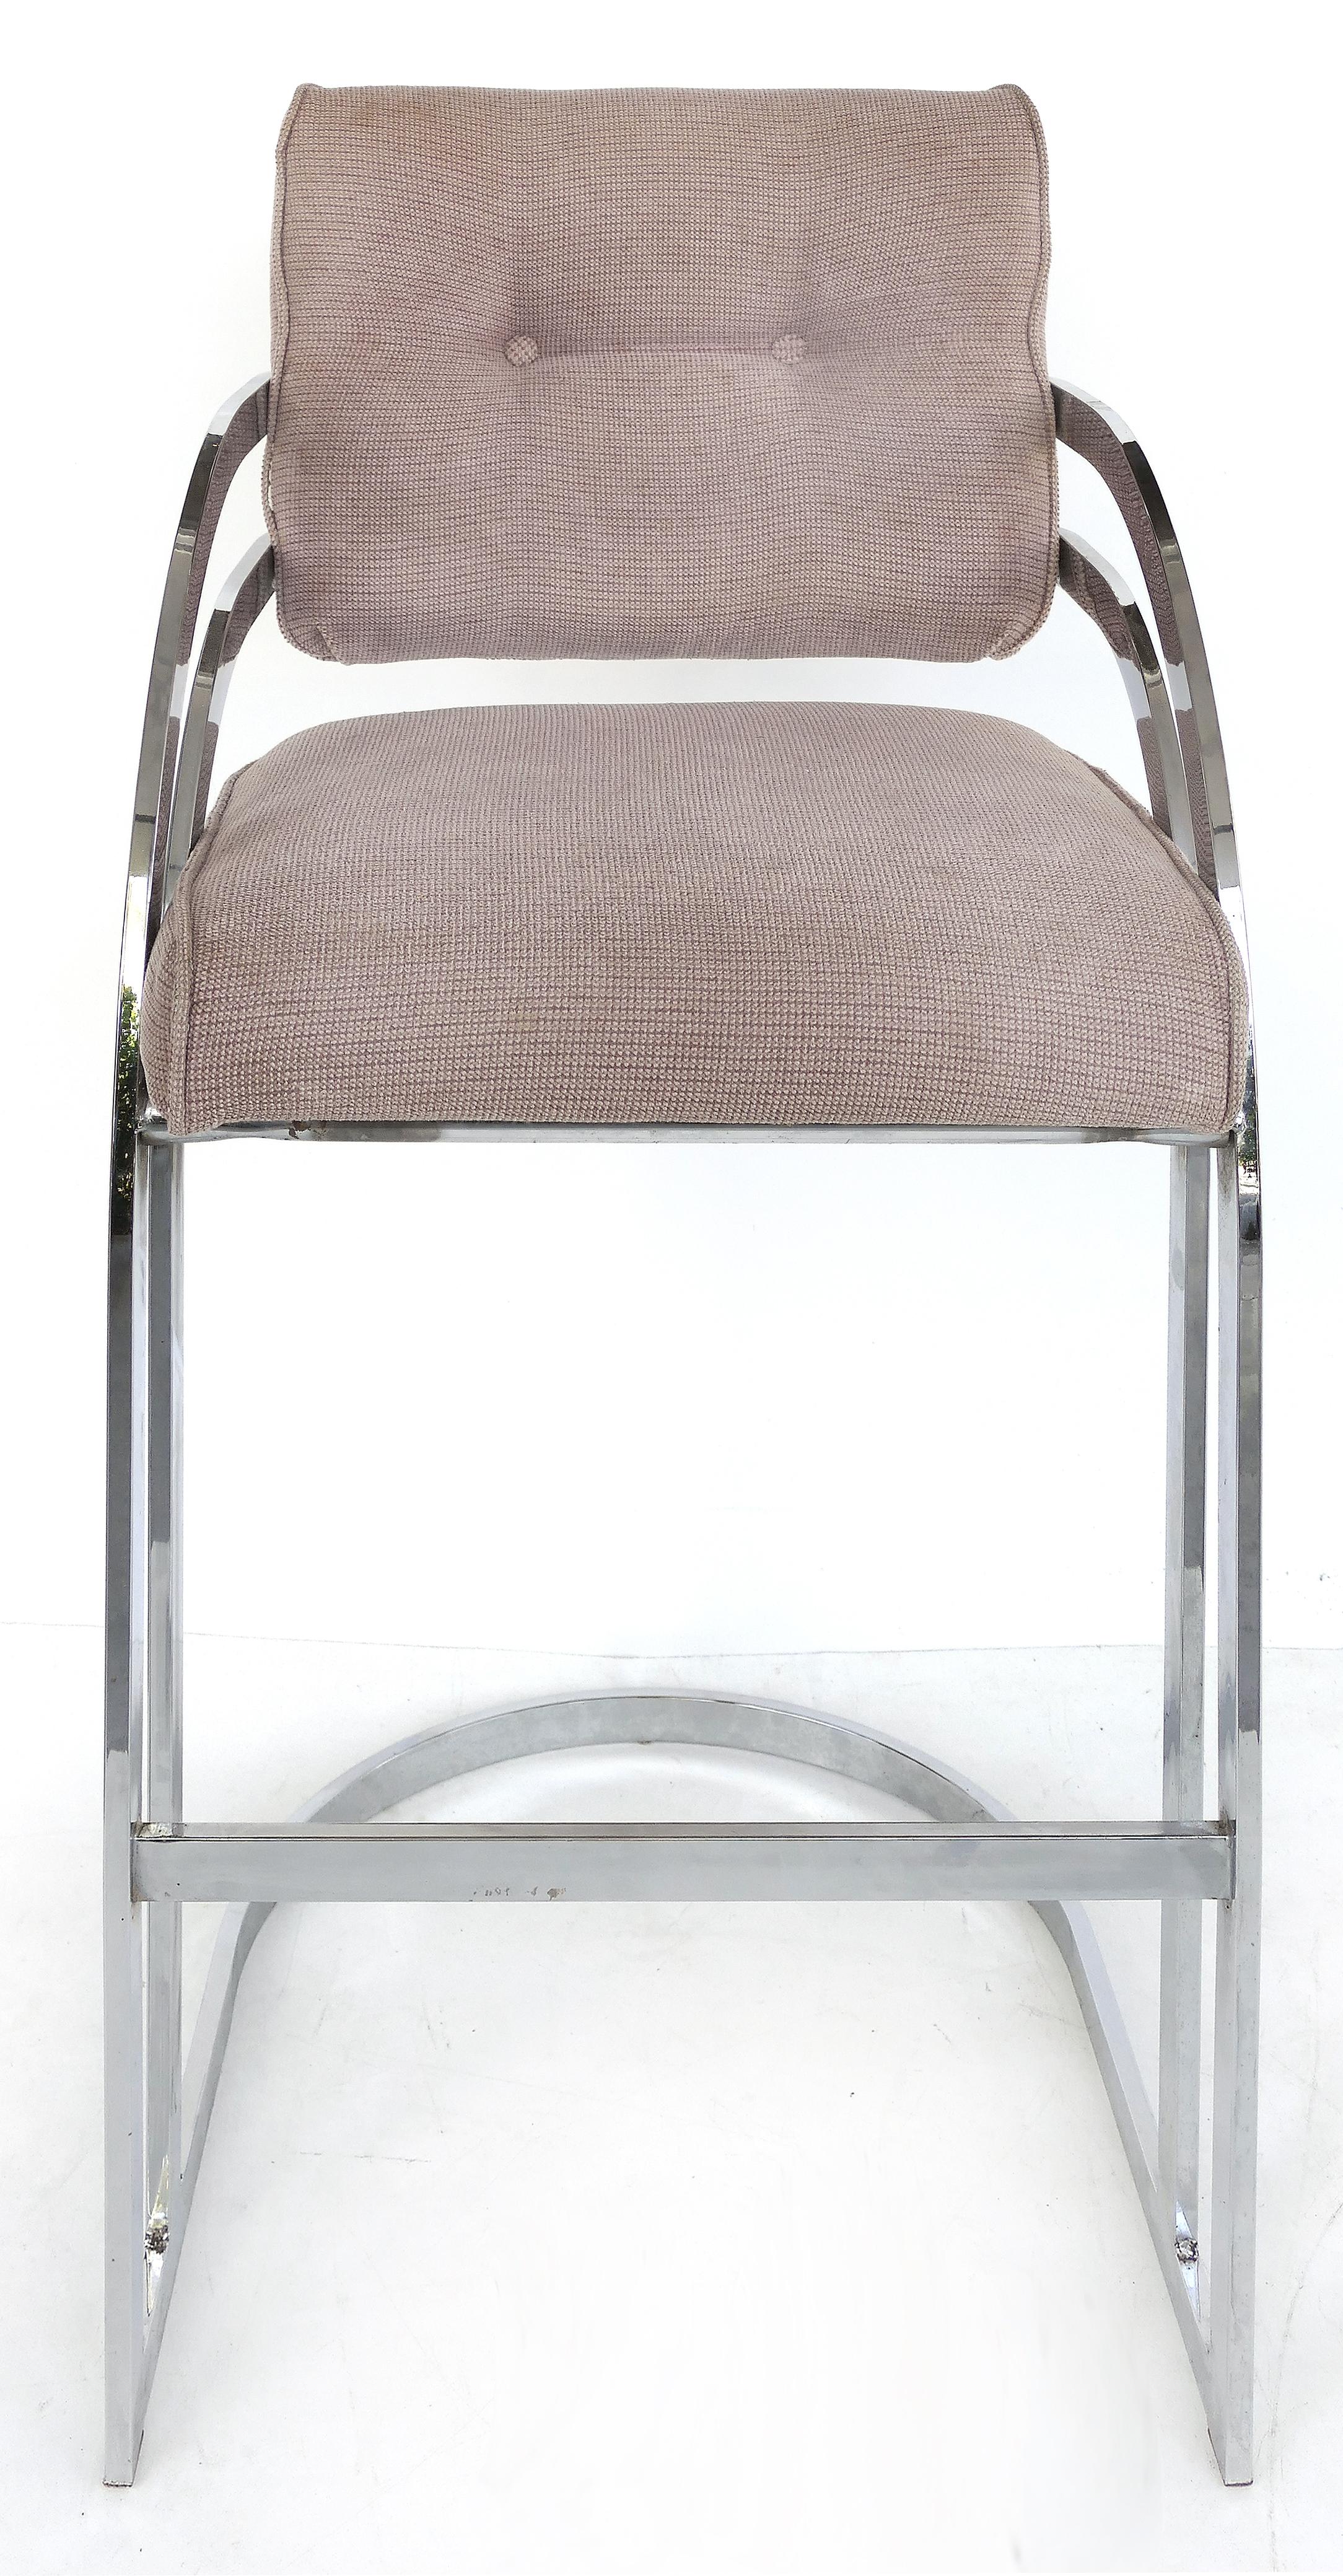 Stainless steel bar stools for DIA (Design Institute of America), pair

Offered for sale is a pair of polished stainless steel bar height stools with upholstered seats by the Design Institute of America. The stool frames are in great condition and